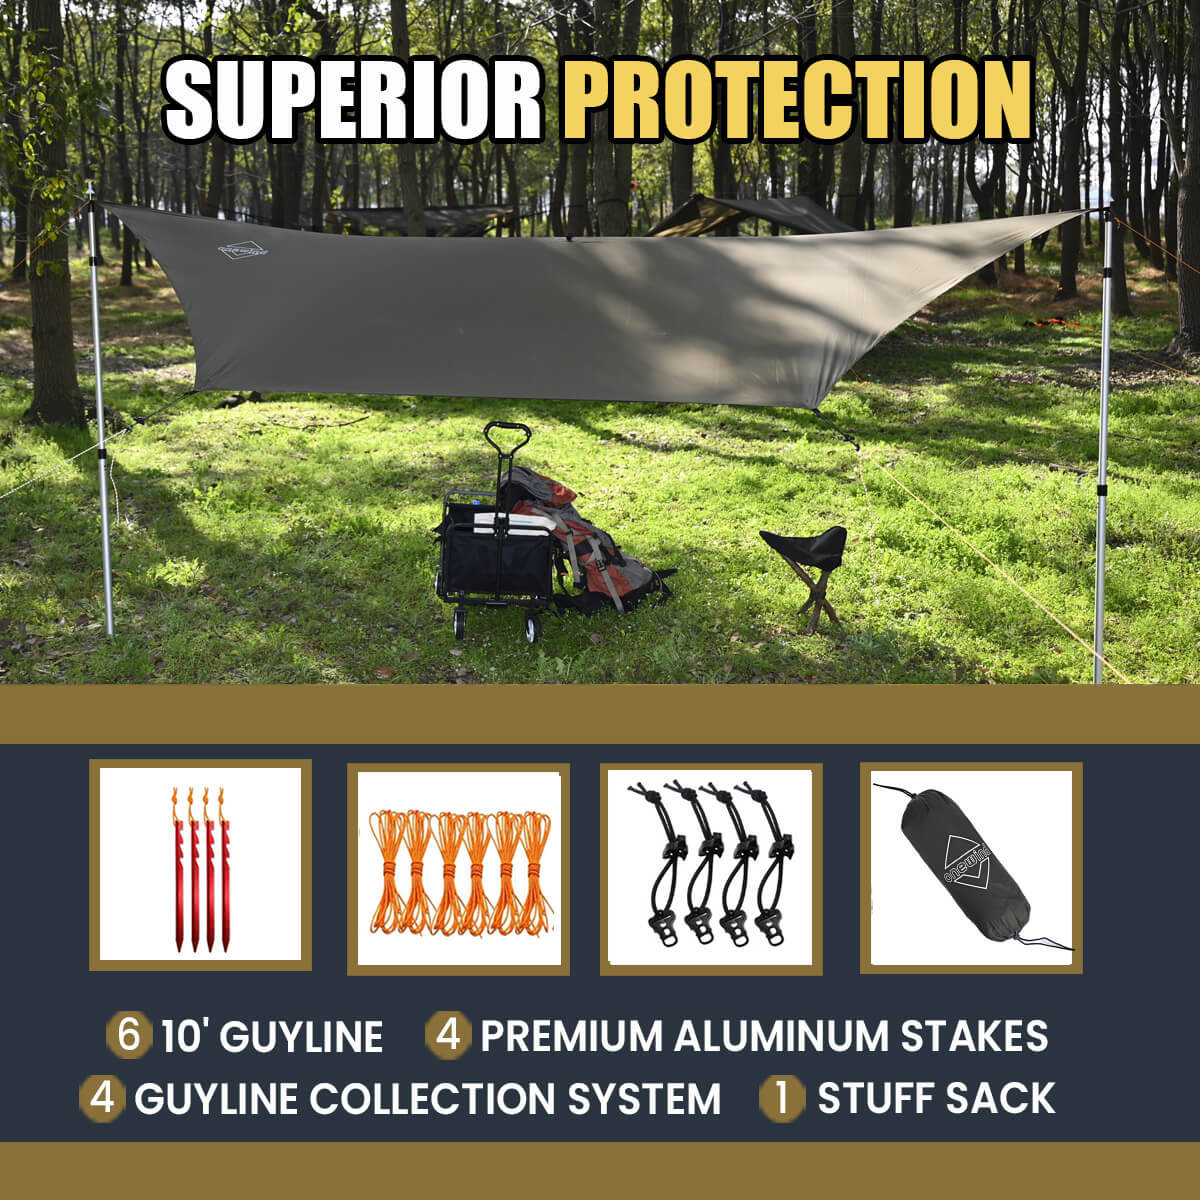 Guyline Protection System | Onewind Outdoors